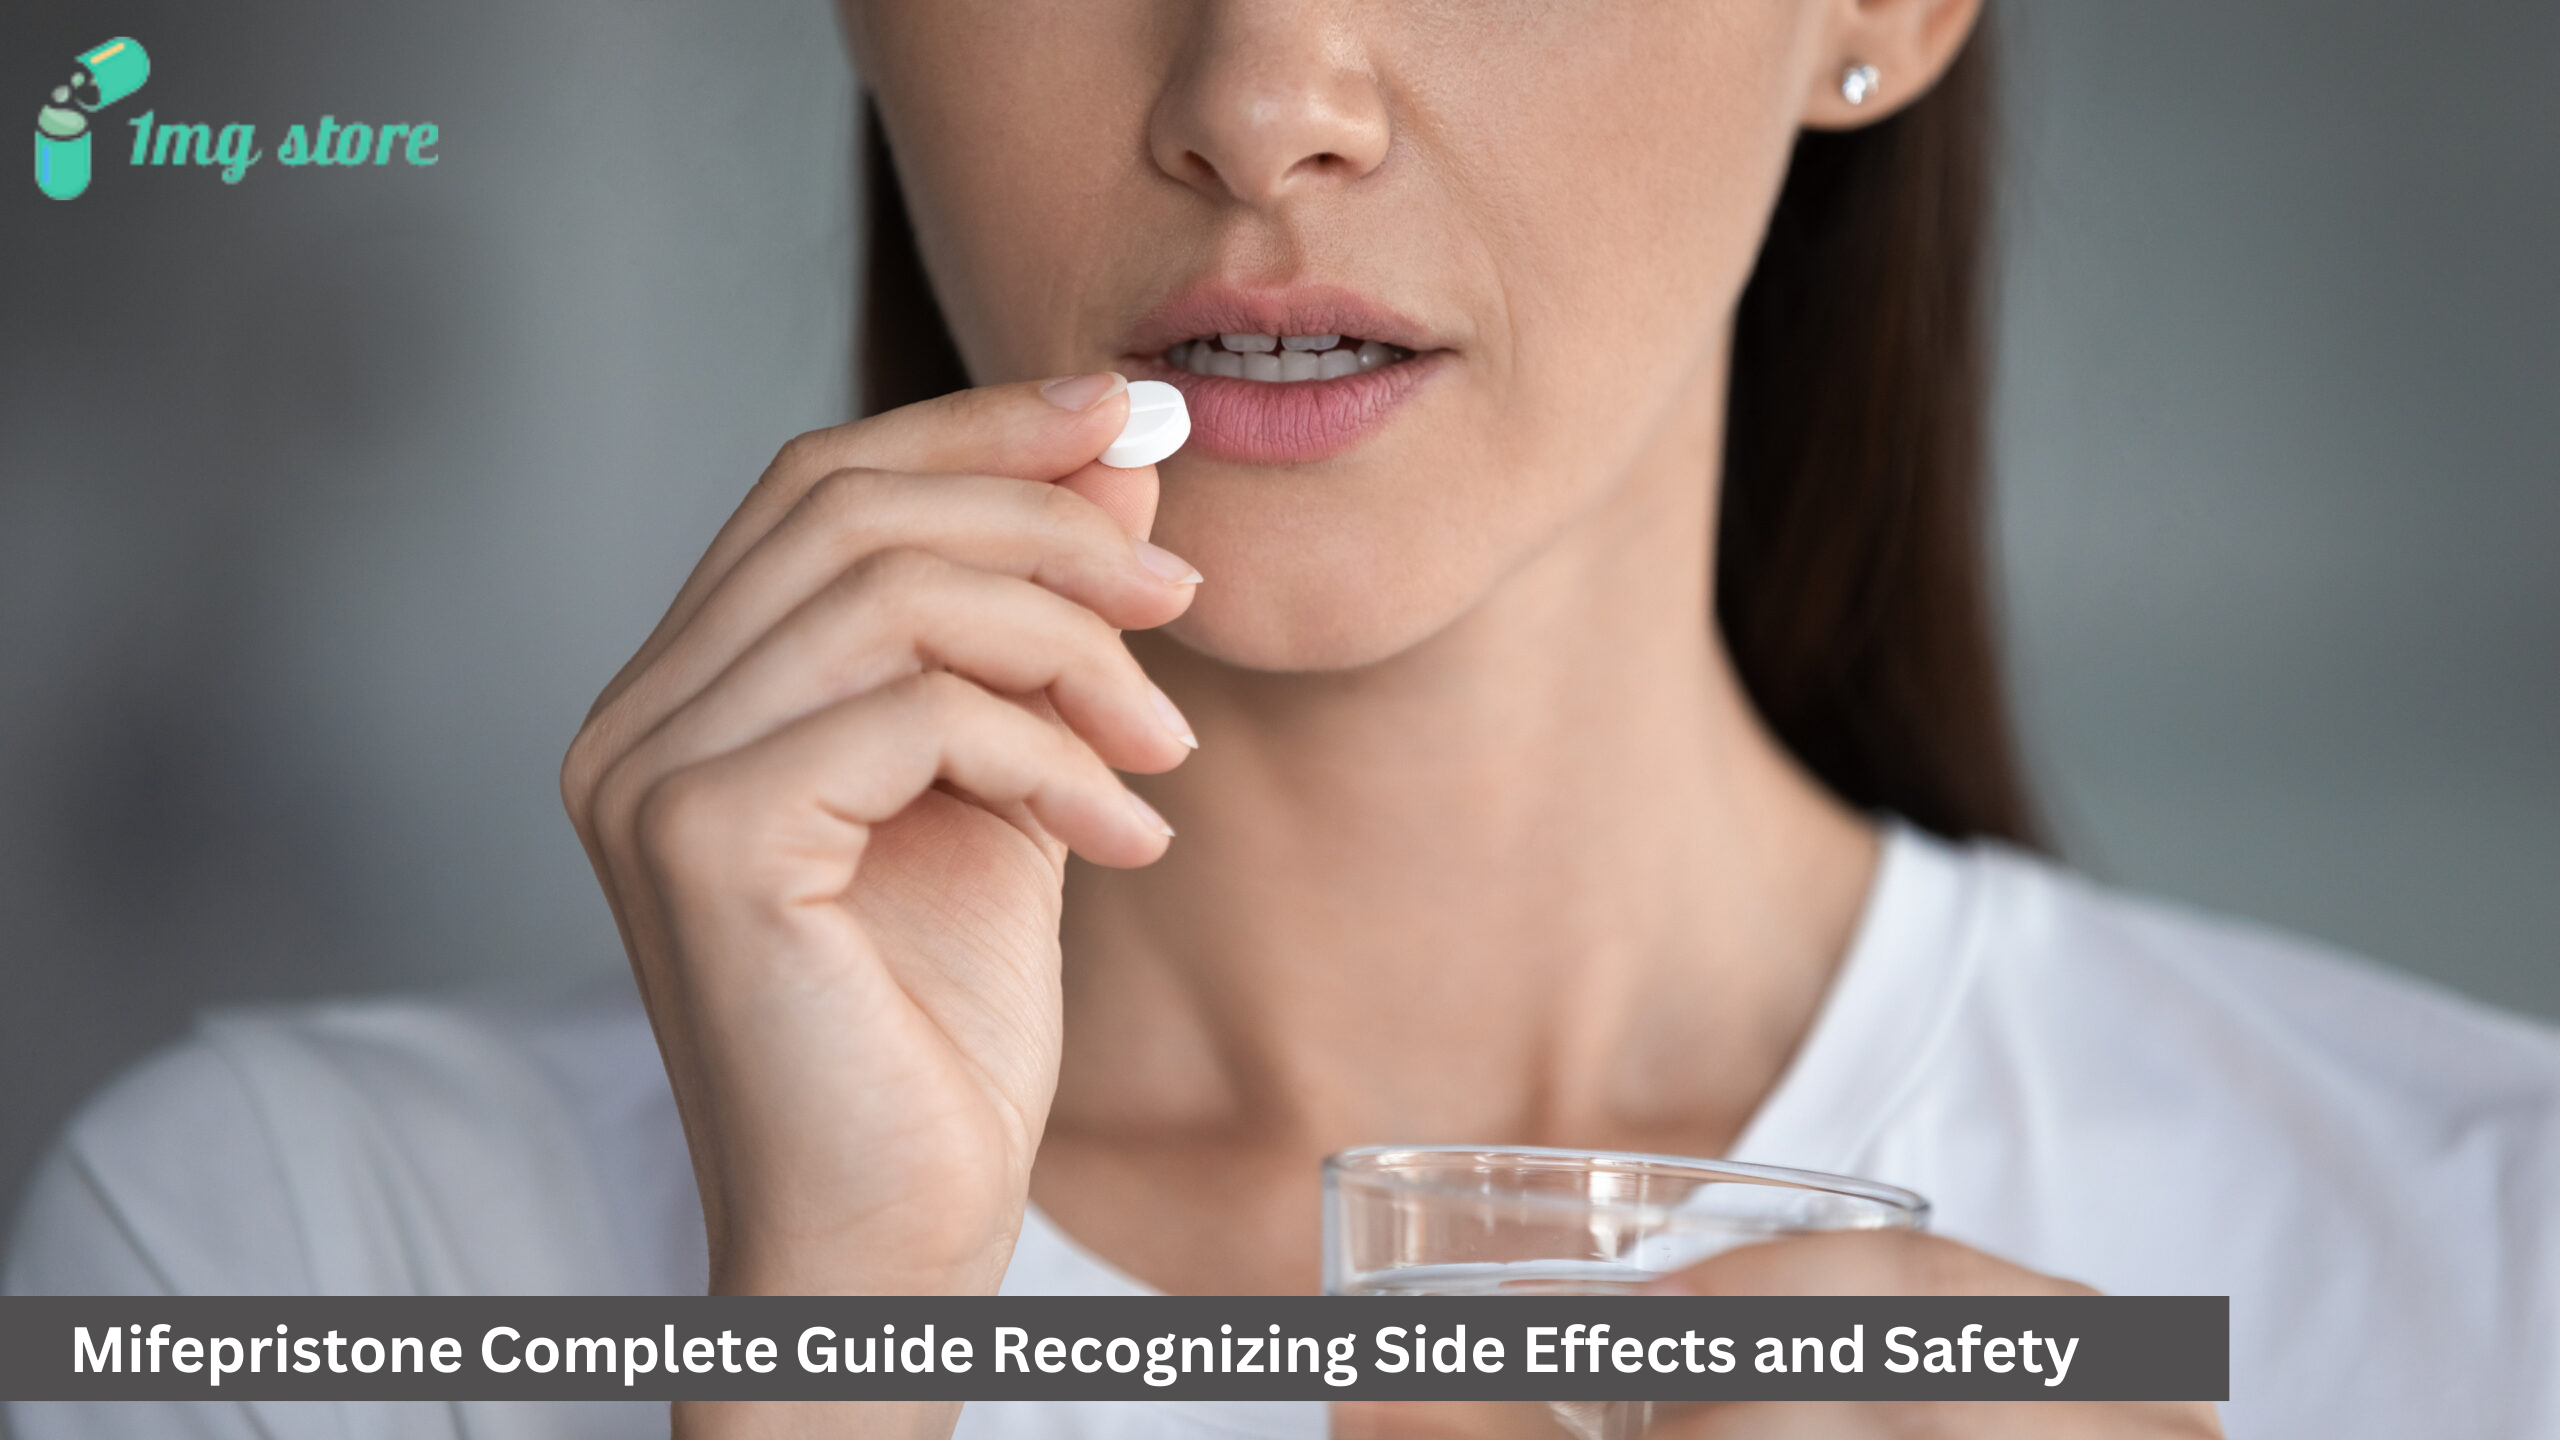 Mifepristone Complete Guide Recognizing Side Effects and Safety